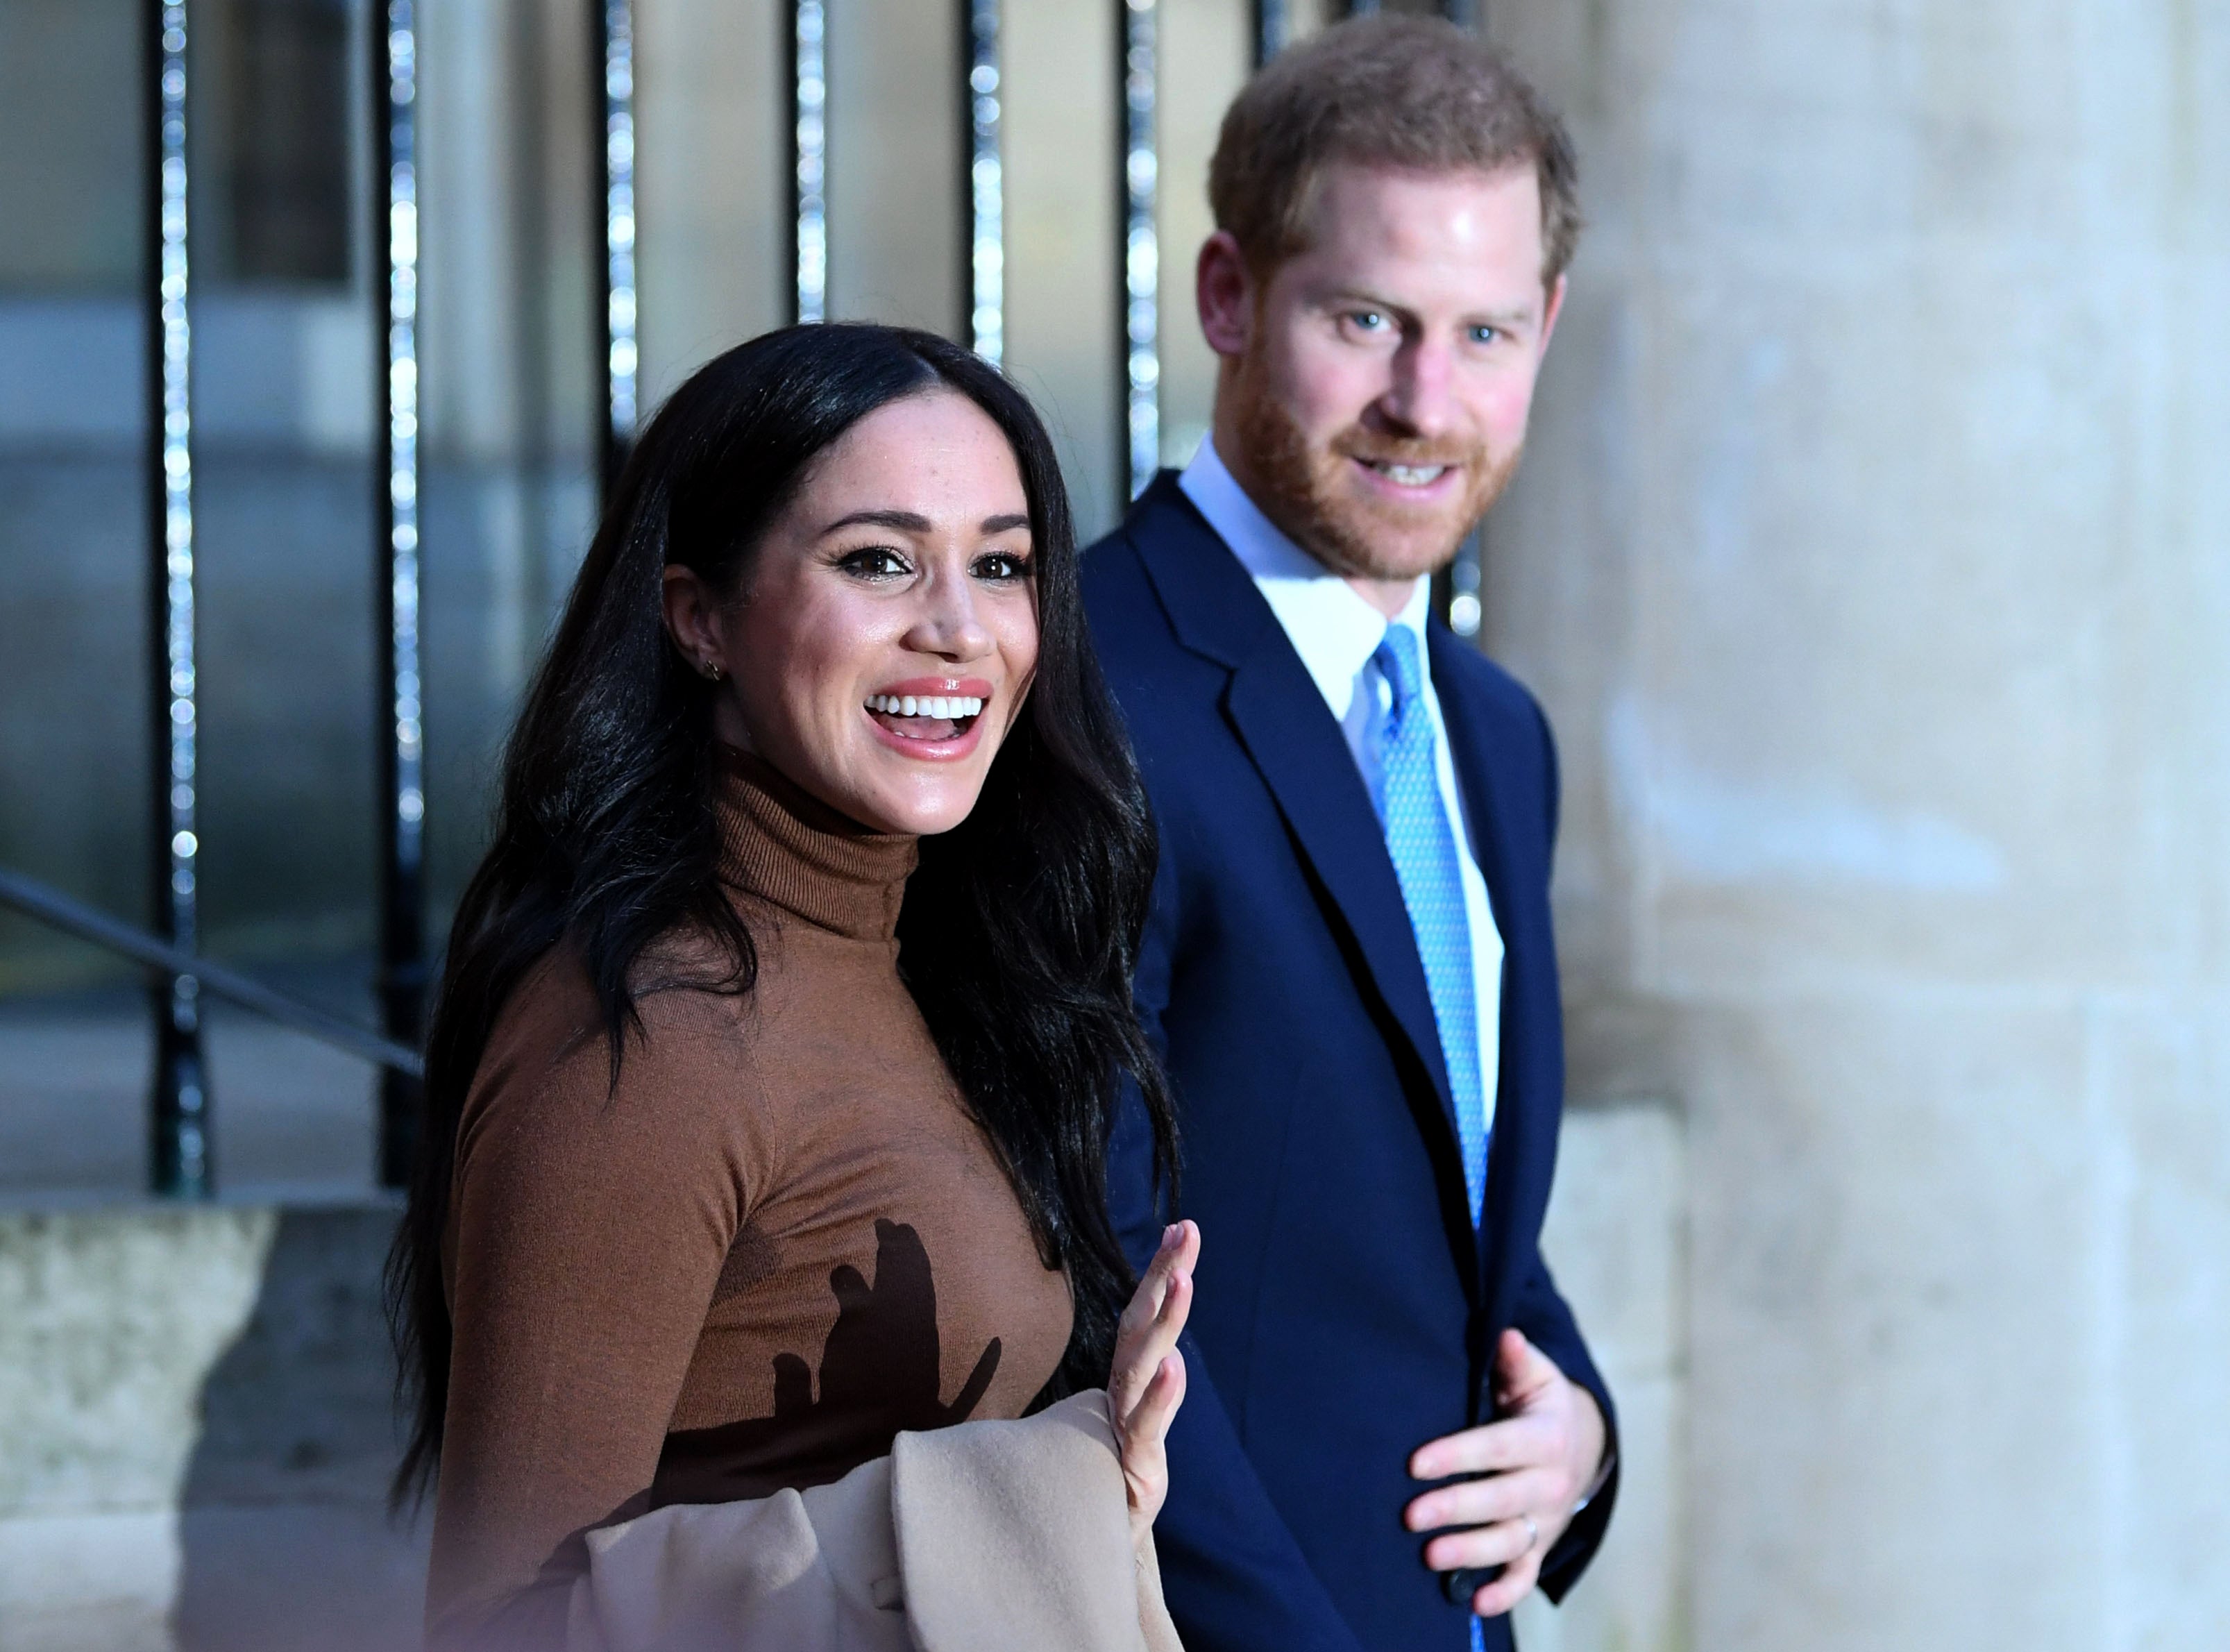 Expecting a publisher to scrunch up Markle’s transcript is asking the impossible